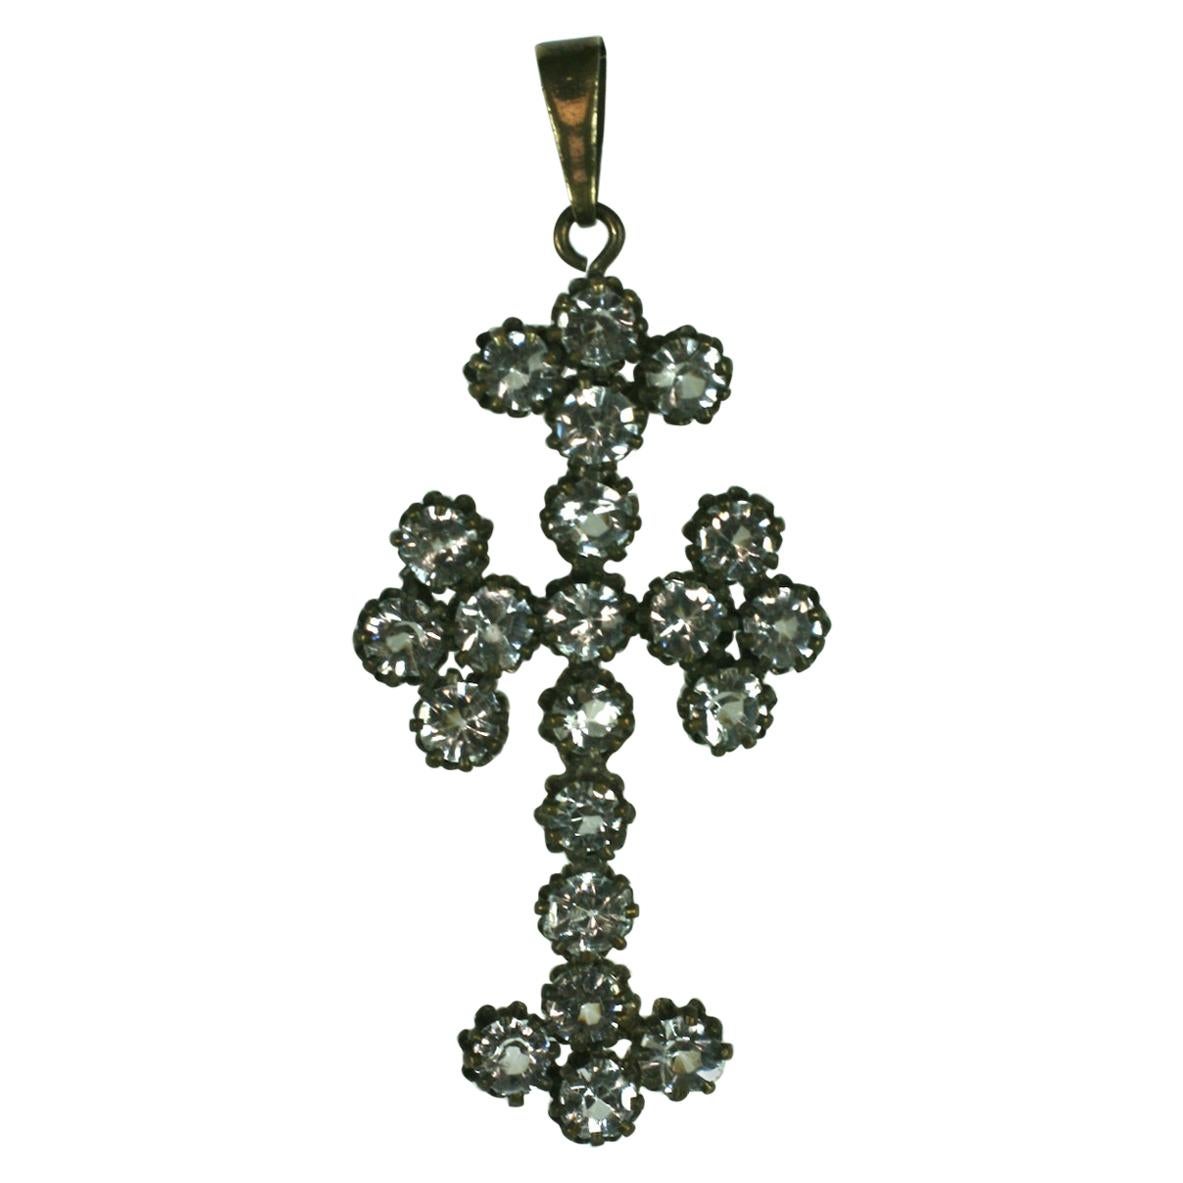 Antique Crucifix Necklace - 5 For Sale on 1stDibs